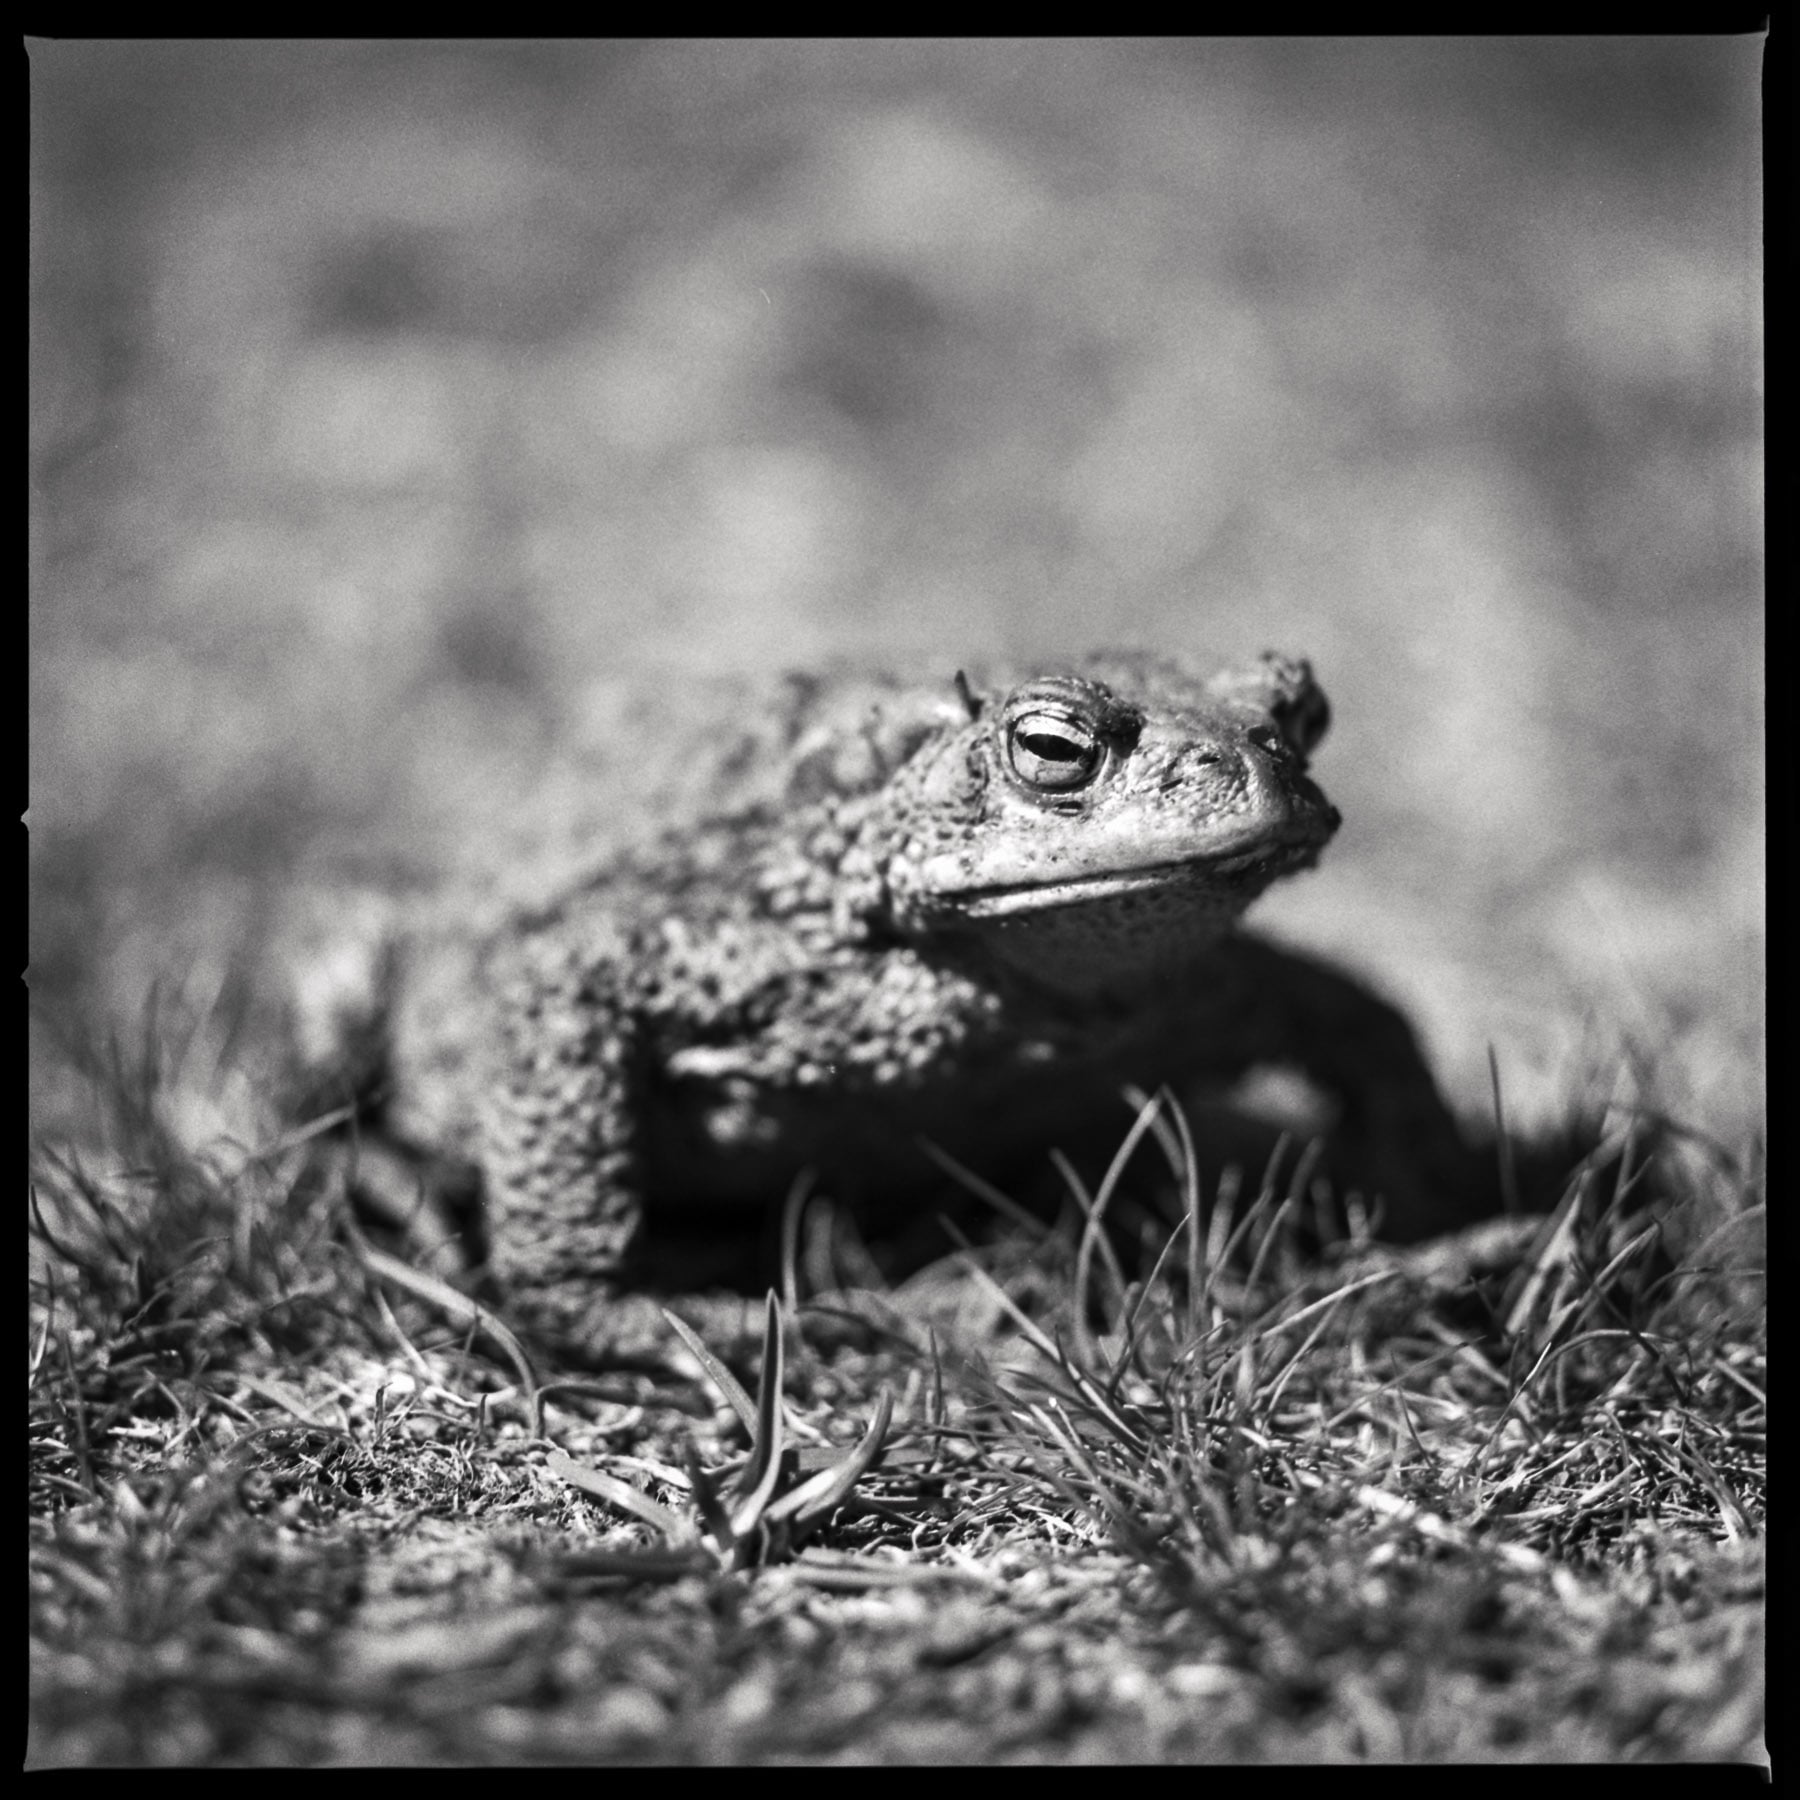 Angry Toad | Hasselblad 500cm | Ilford FP4+ | Marie Westerbom